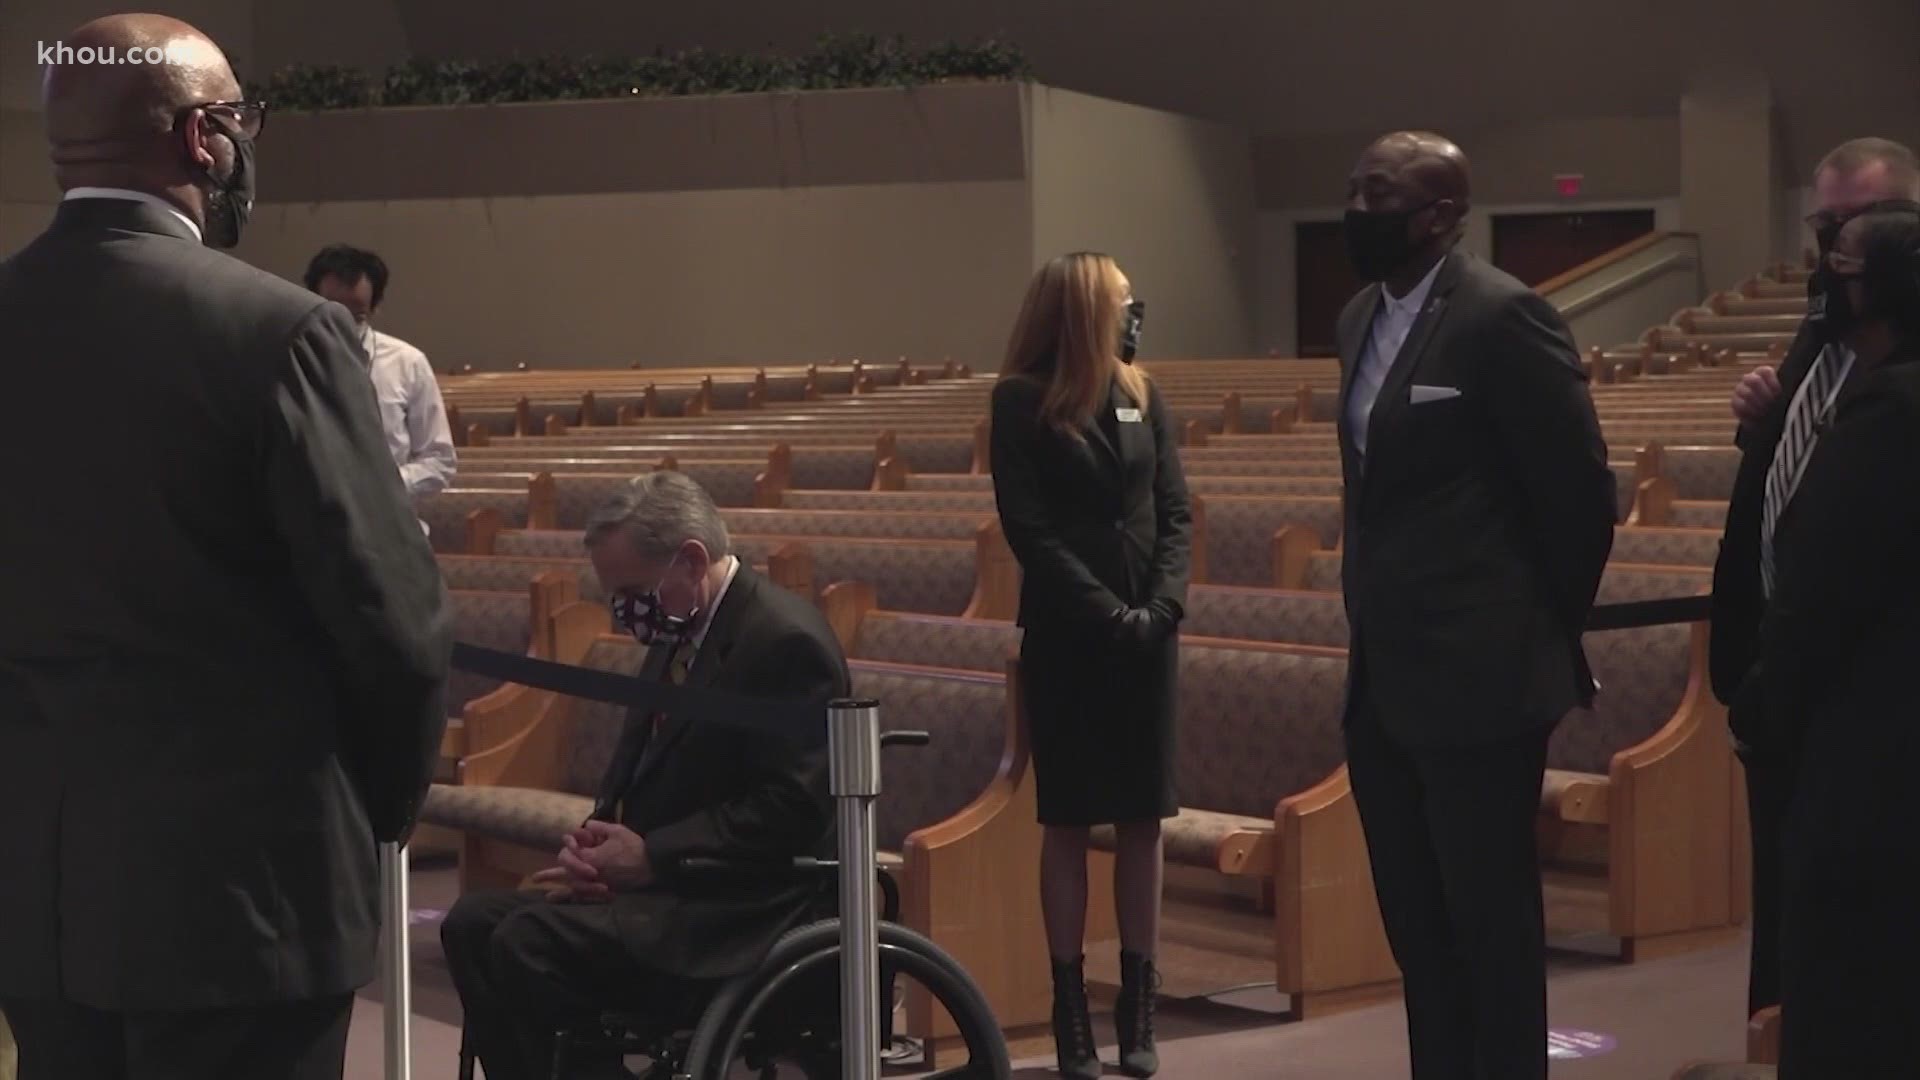 Gov. Greg Abbott and Congresswoman Shelia Jackson Lee paid their respects to George Floyd during a public visitation at The Fountain of Praise church.